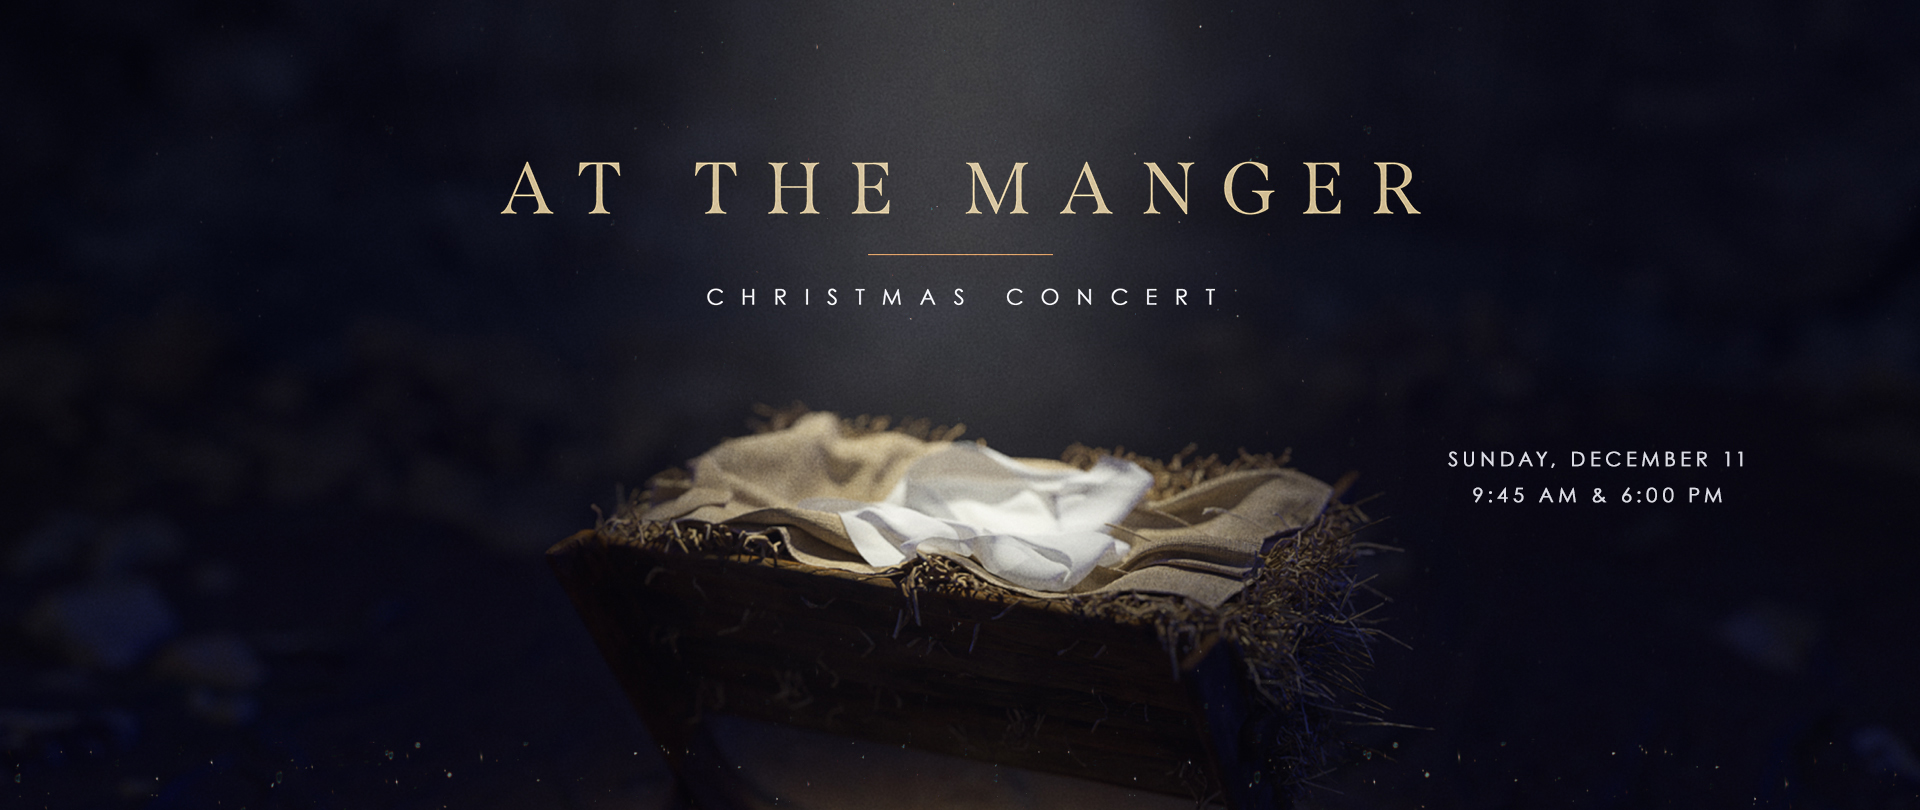 Christmas Concert
"At the Manger"
Sunday, December 11
9:45 AM & 6:00 PM
